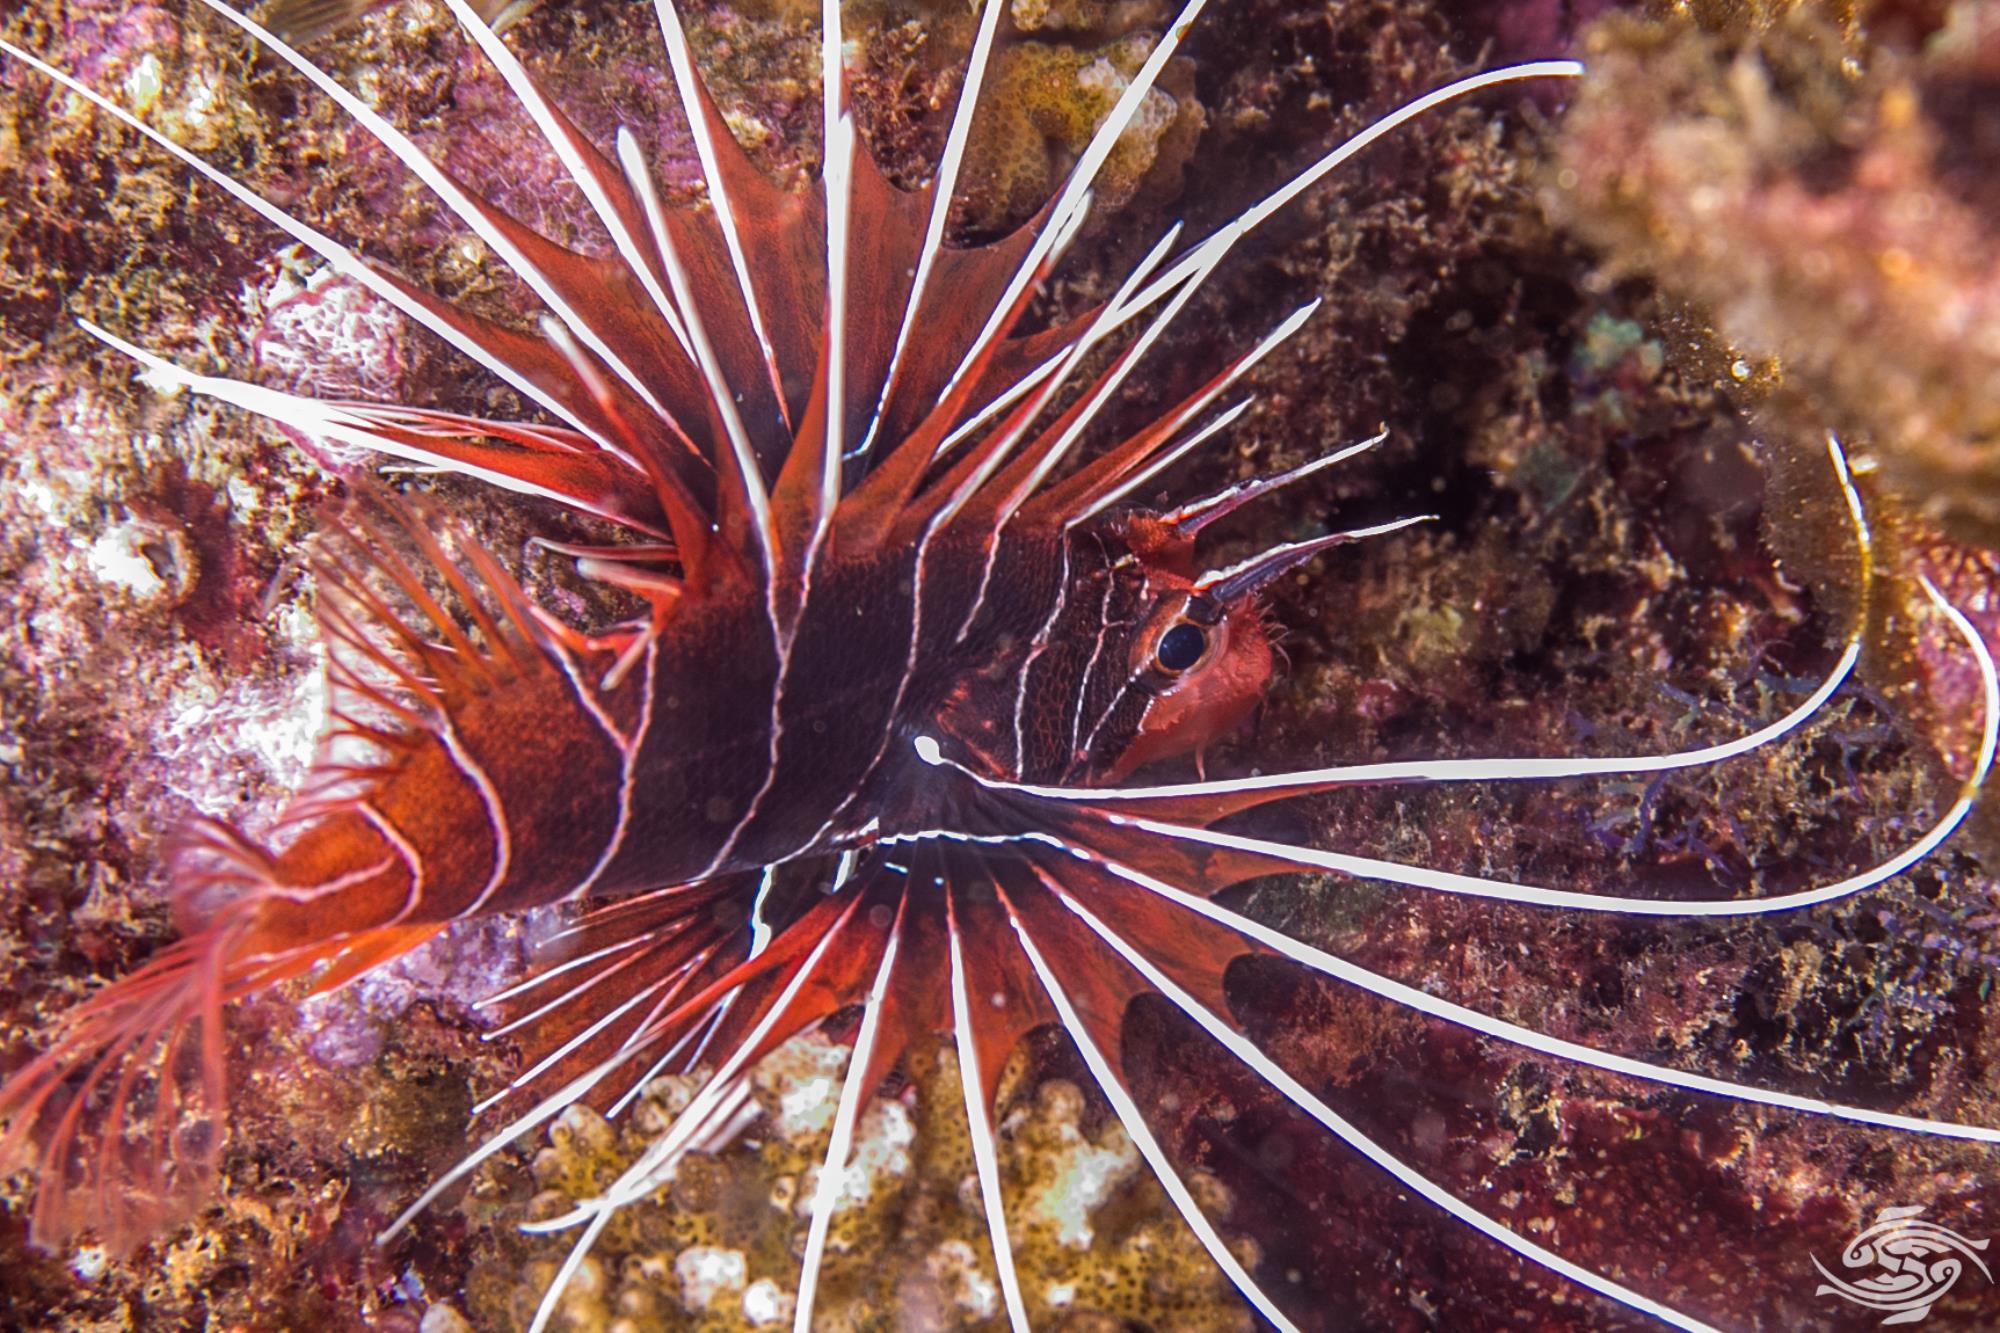 Clearfin Lionfish-Facts Photographs - Seaunseen